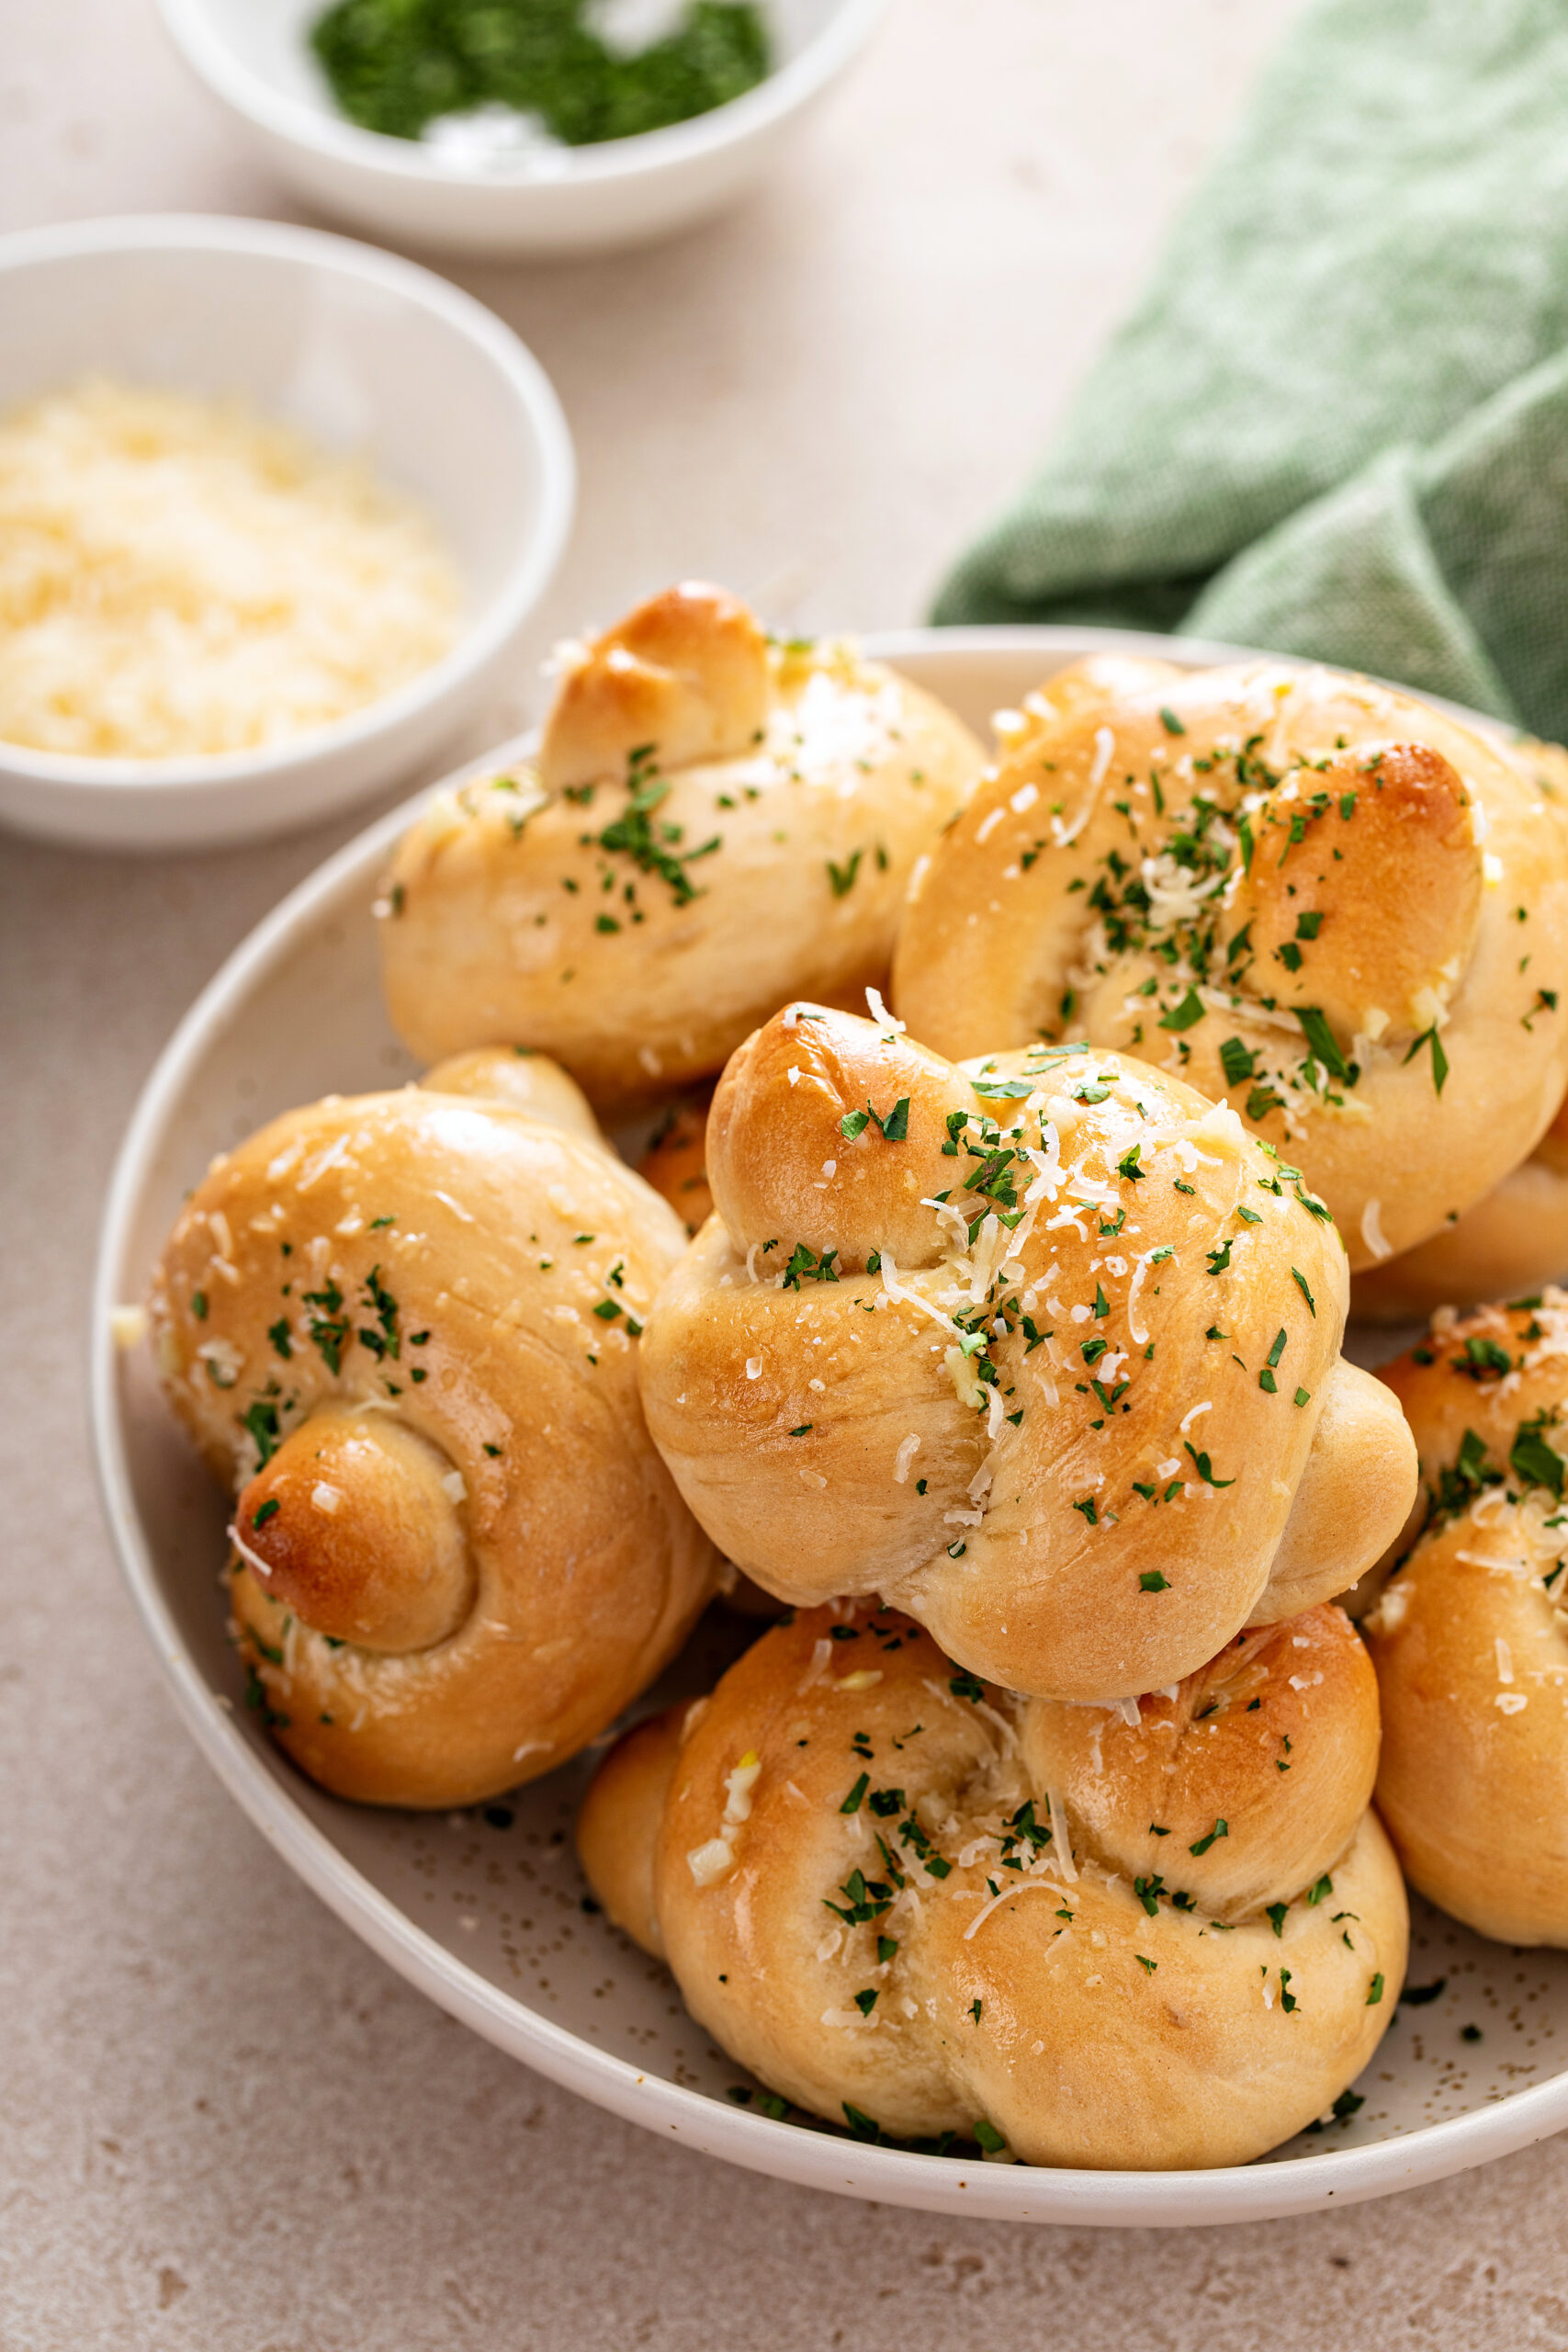 These homemade garlic knots made with simple, everyday ingredients! CLICK HERE to make this delicious recipe that is perfect on their own, or dipped in zesty marinara sauce.